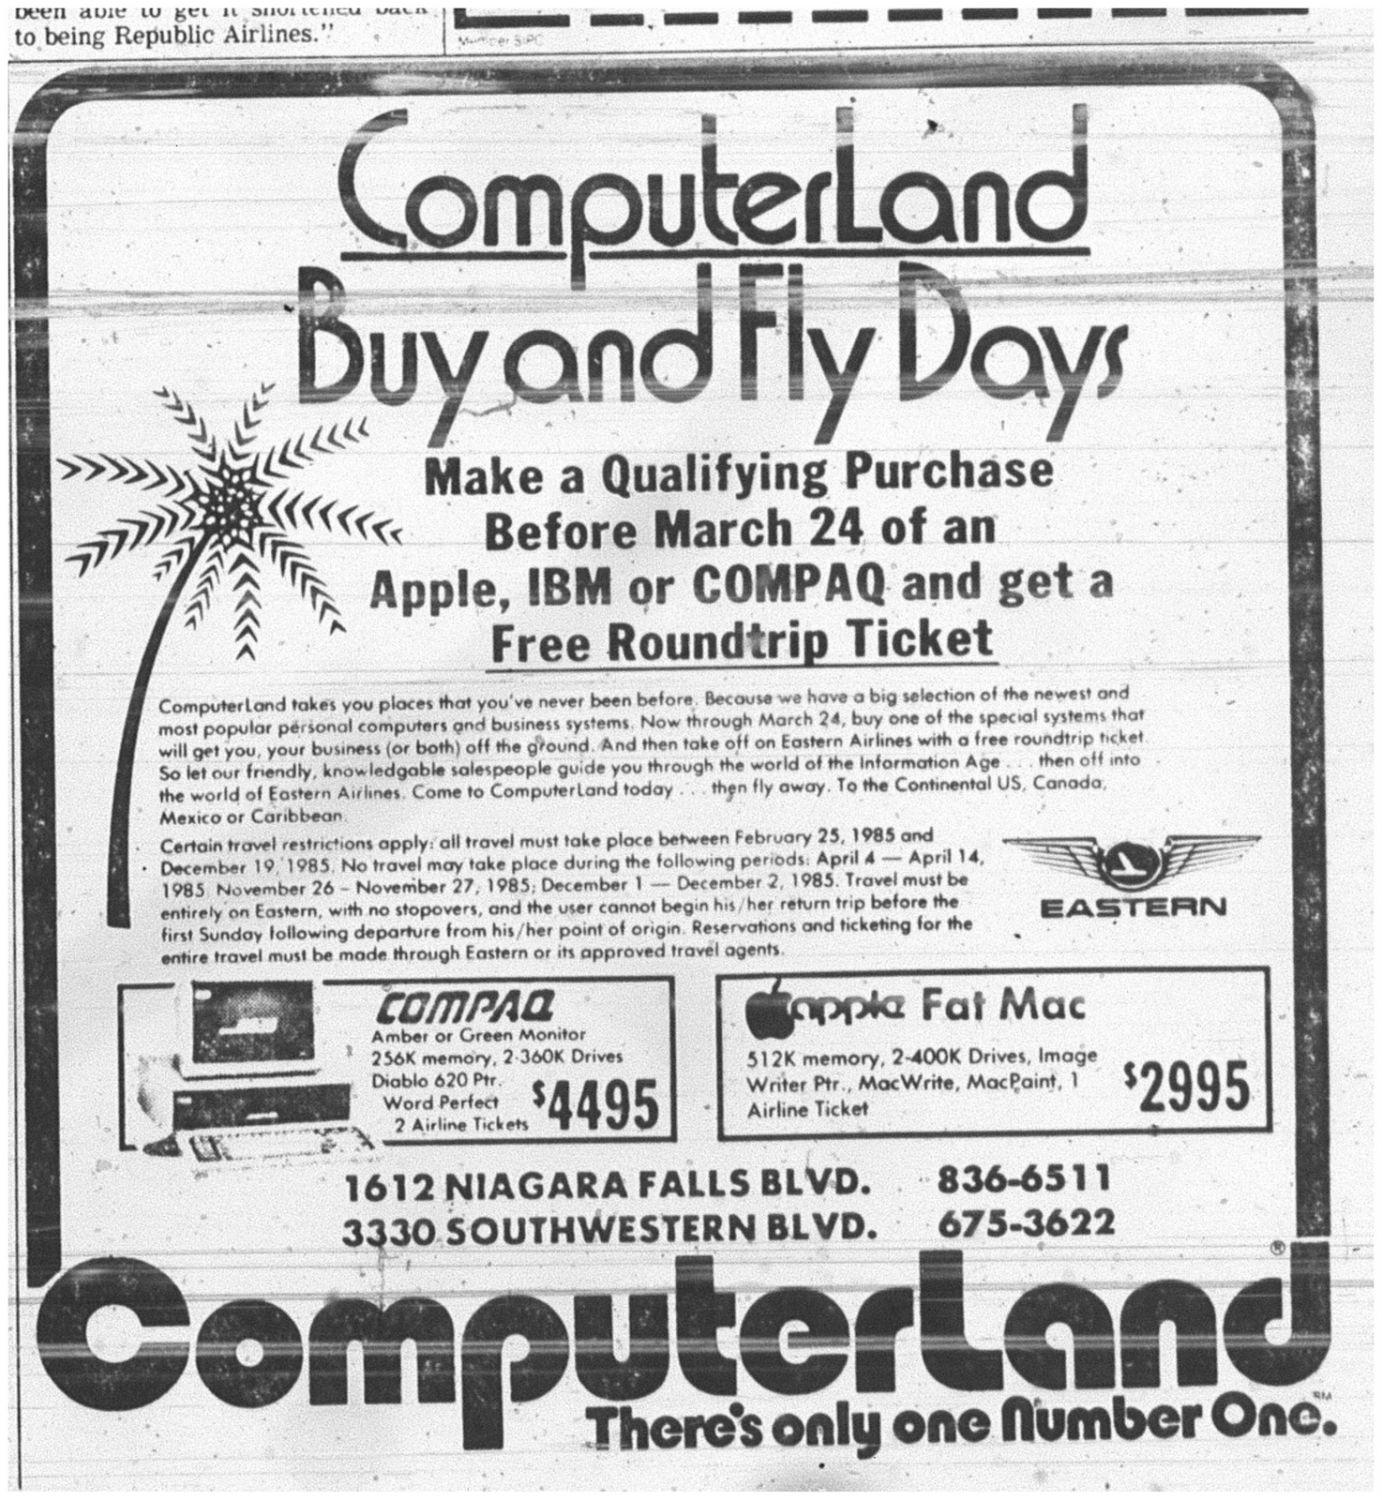 A Buffalo News print advertisement from March 1985: &ldquo;ComputerLand Buy and Fly Dats &ndash; Make a Qualifying Purchase Before March 24 of an Apple, IBM or COMPAQ and get a Free Roundtrip Ticket.&rdquo;